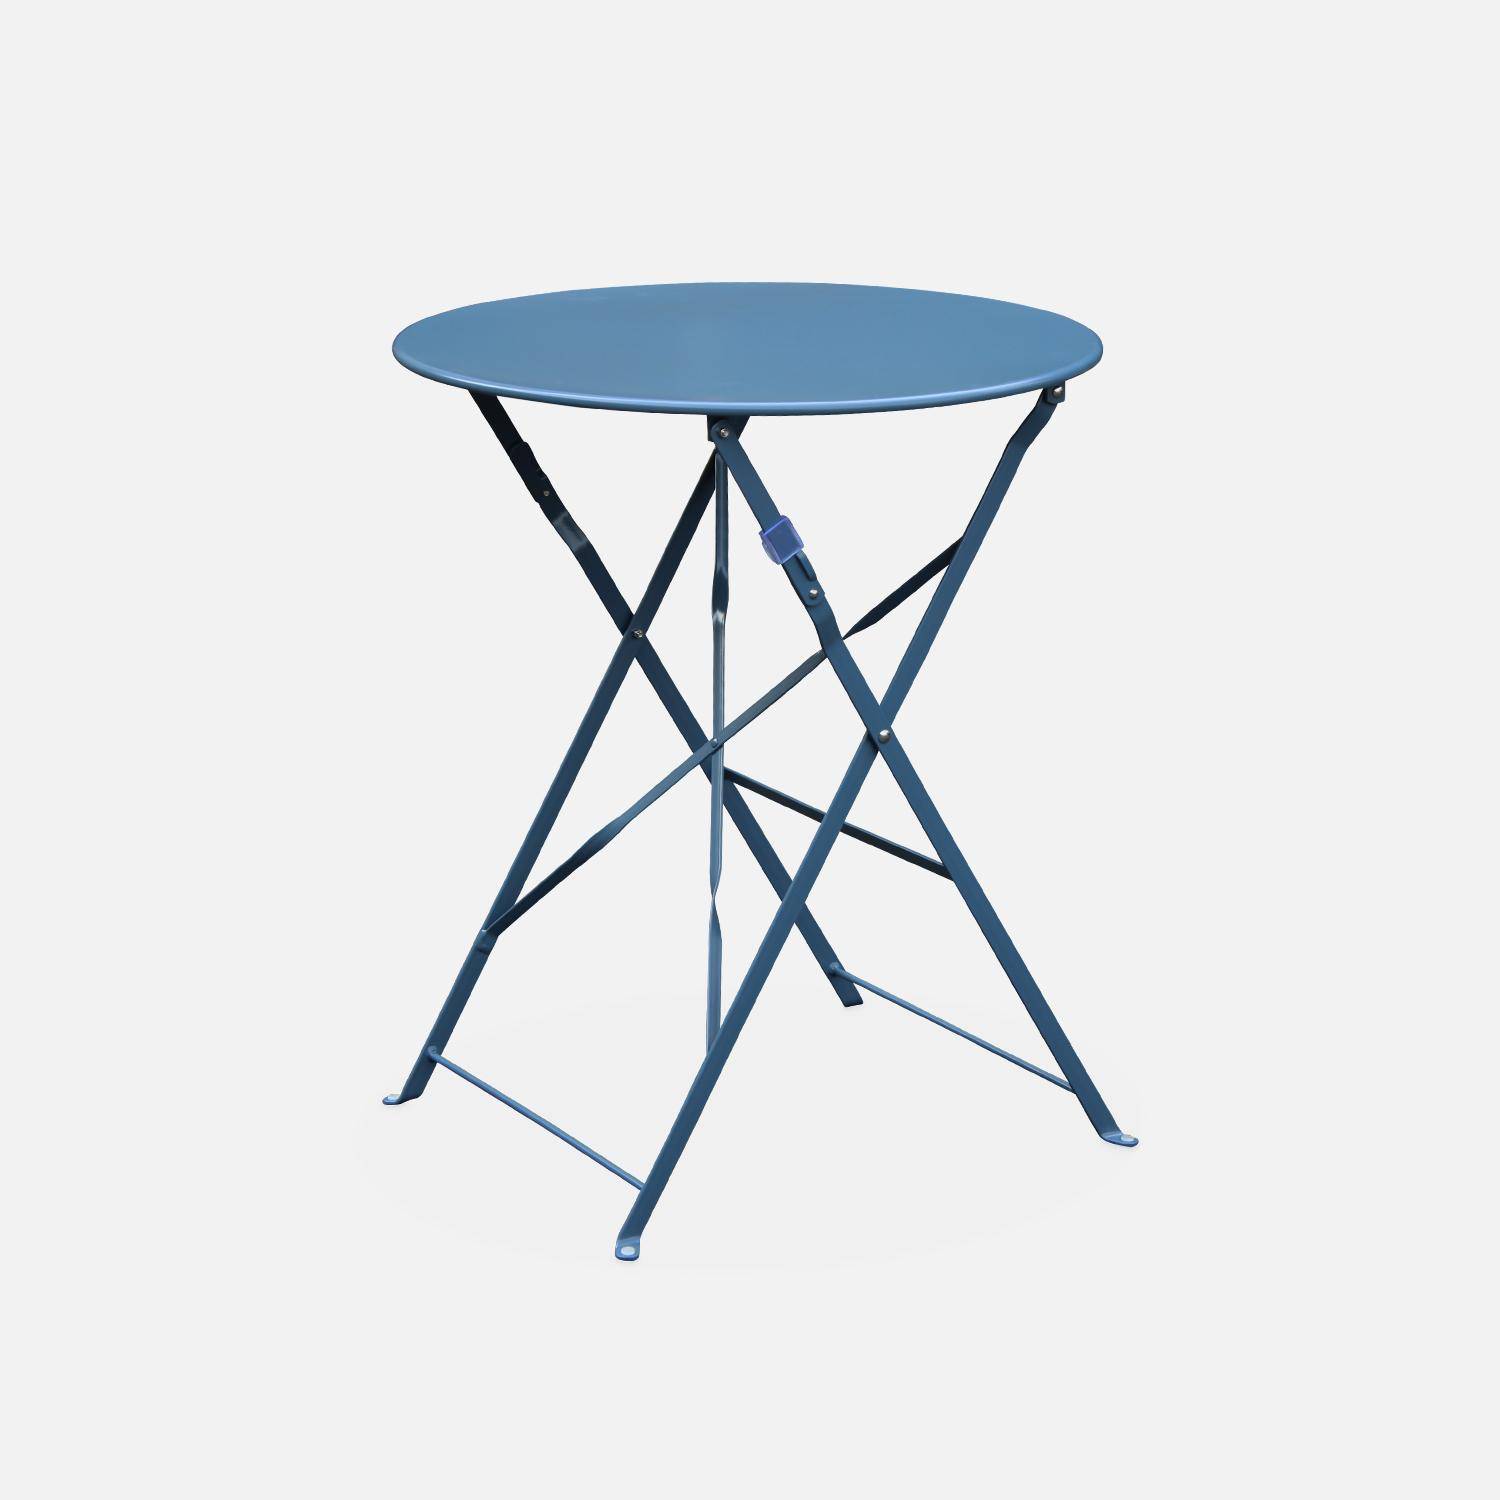 Foldable bistro garden table - Round Emilia grey blue - Round table Ø60cm, thermo-lacquered steel Photo4